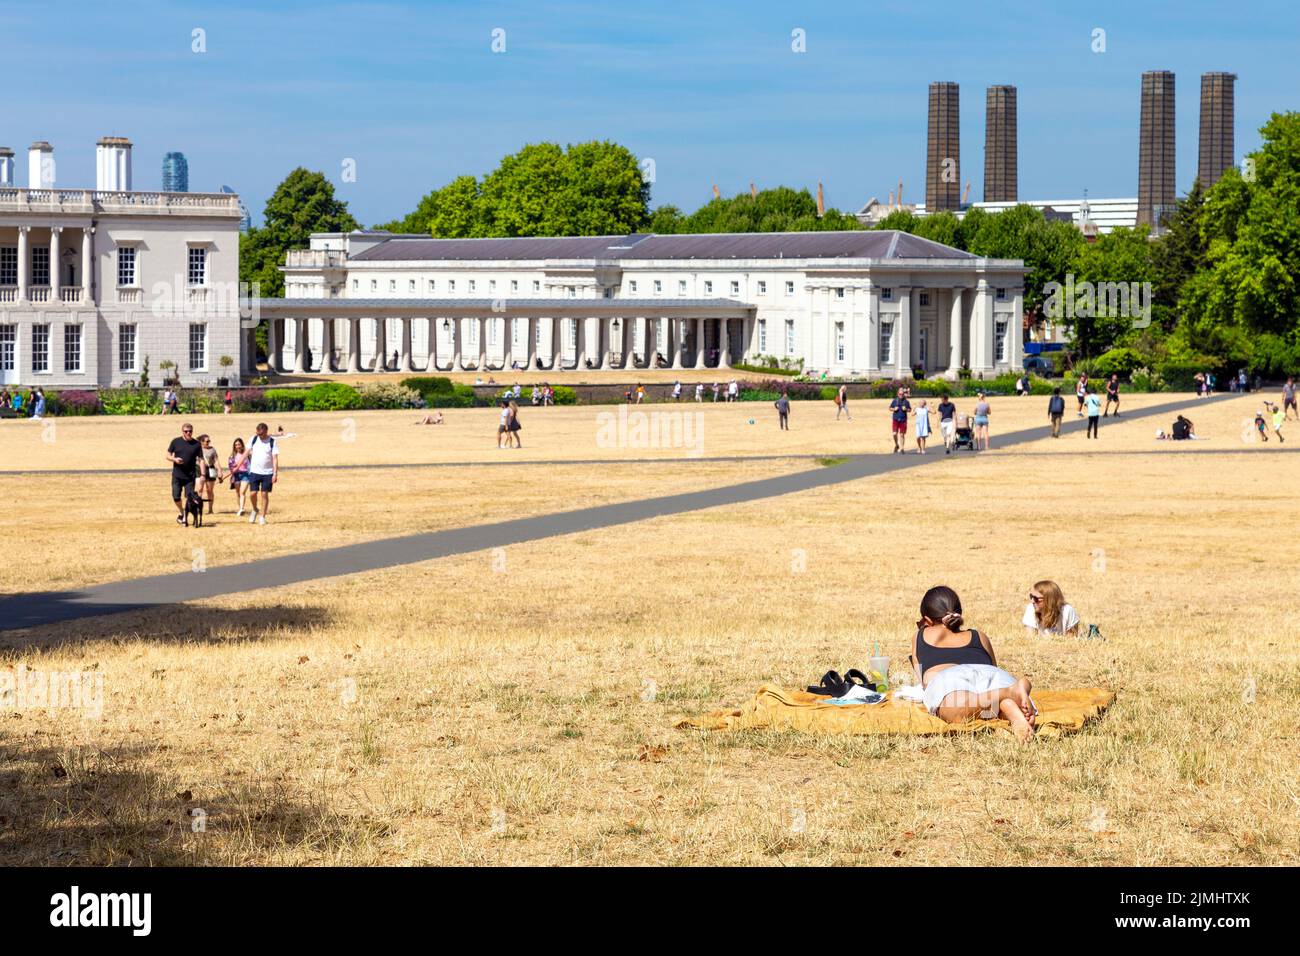 6 August 2022 - London, UK - People picninging and sunbathing on dried out grass at Greenwich Park after a series of heatwaves and record high temperatures, city facing drought and water rationing measures Stock Photo